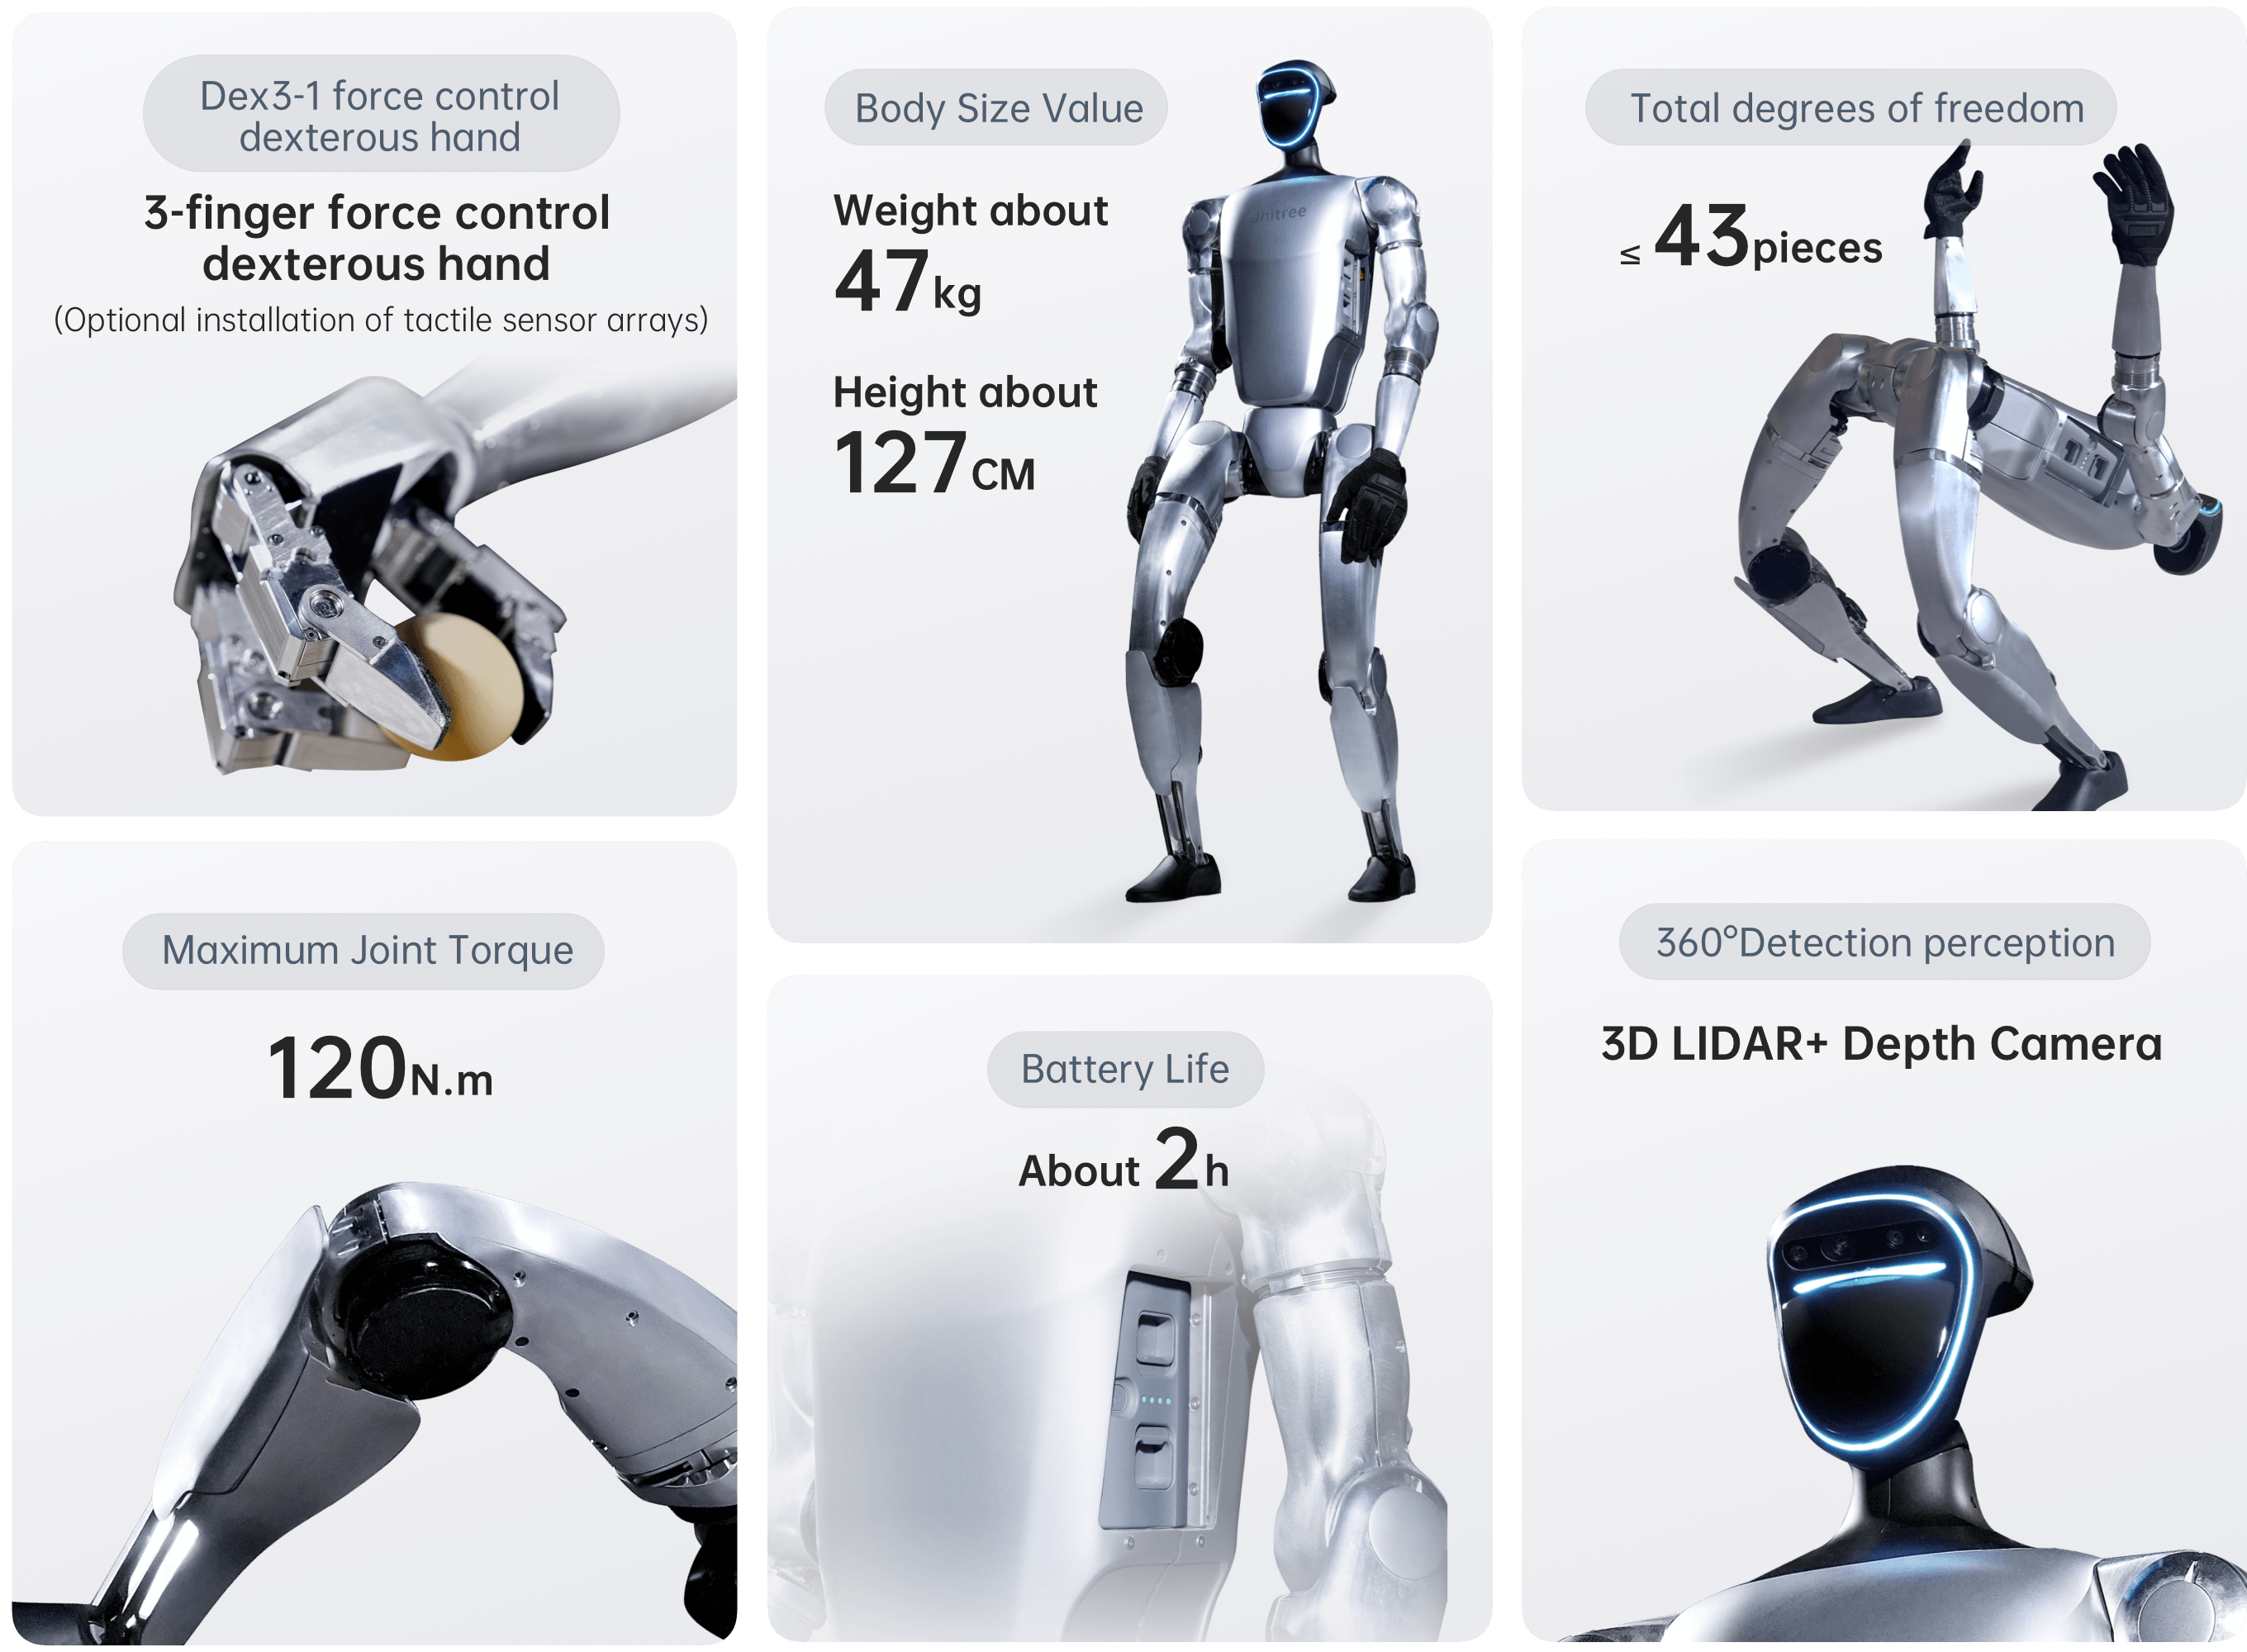 Technical specifications of the unitree G1 robot